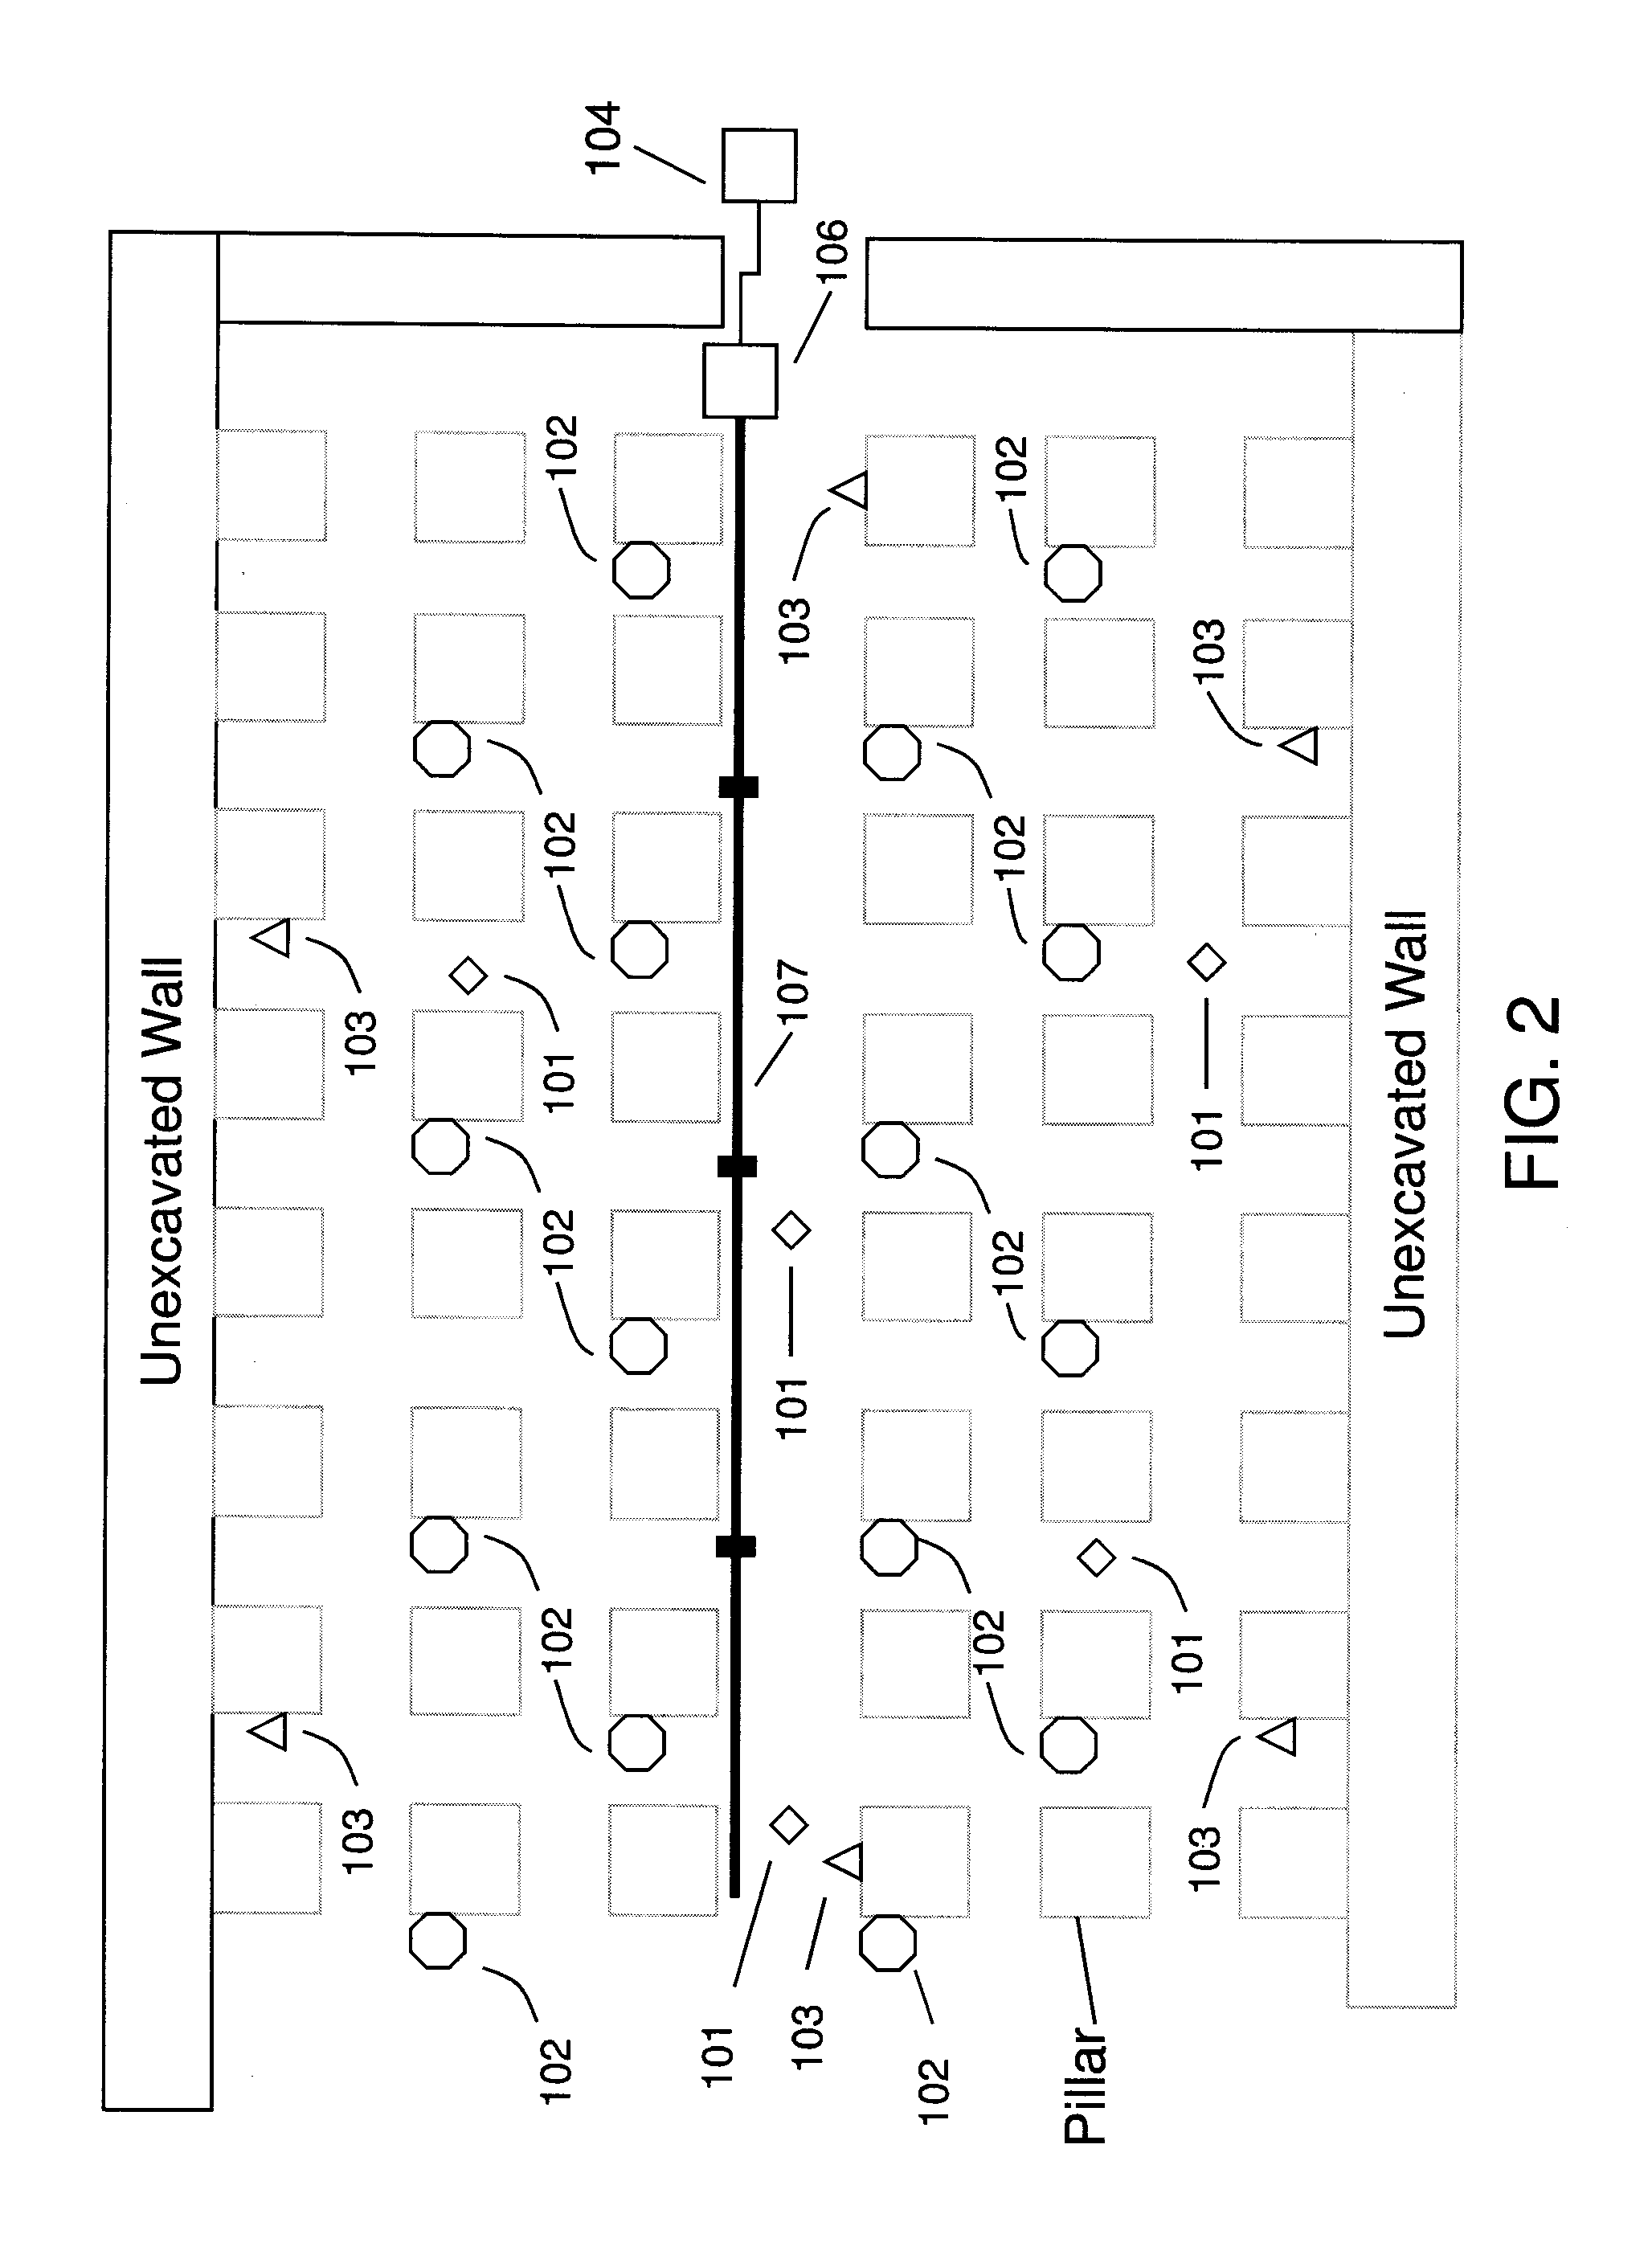 Method and Apparatus for Reliable Communications in Underground and Hazardous Areas